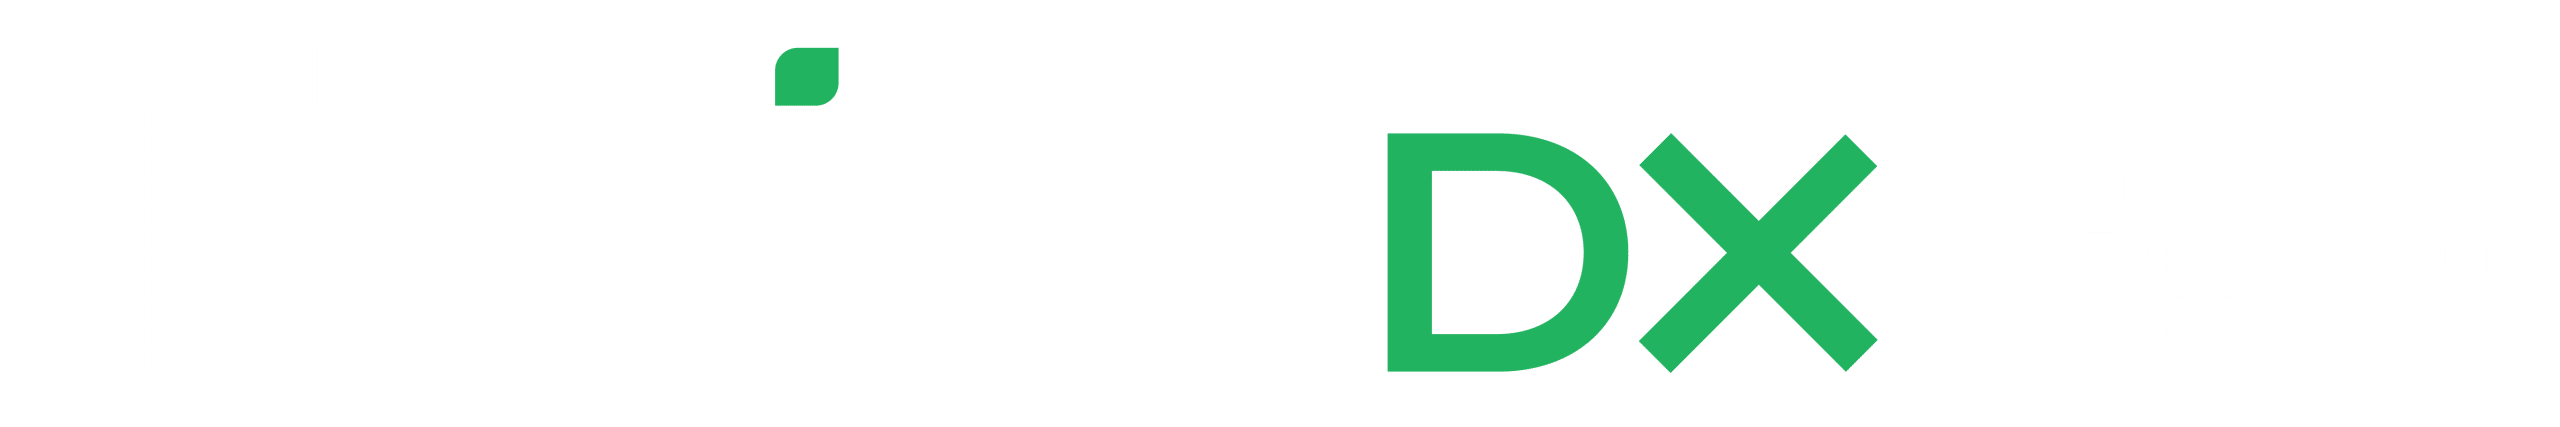 ThriveDX logo white with green accents and tagline